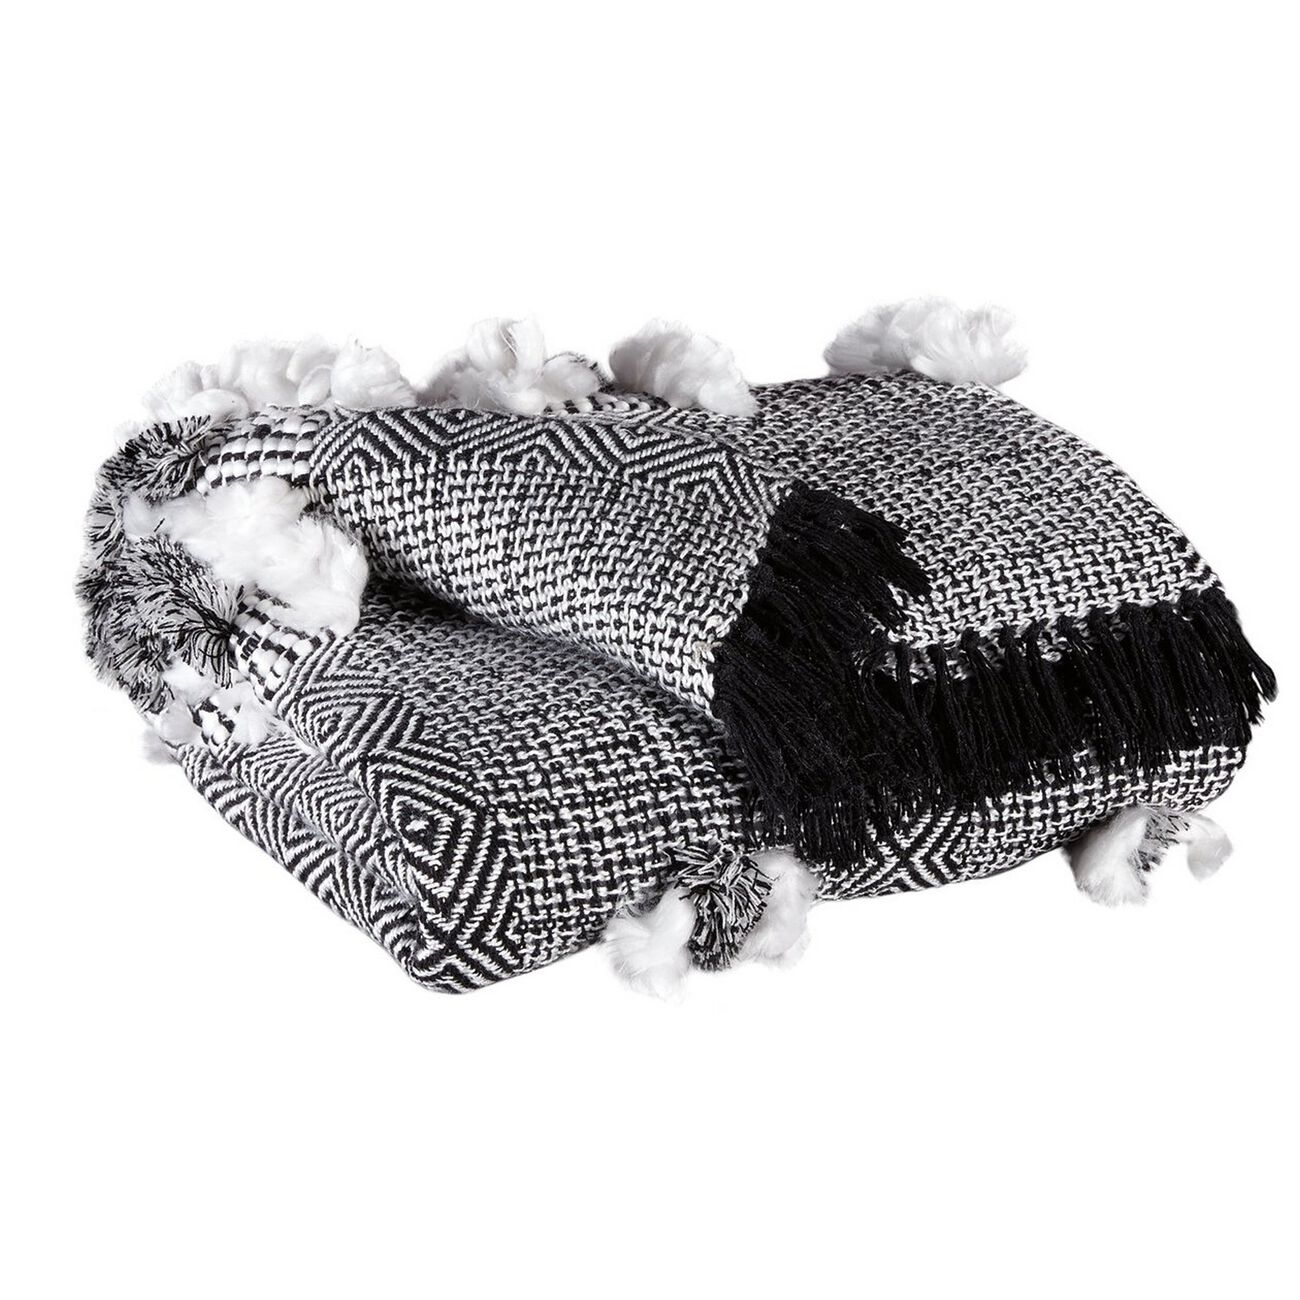 60 x 50 Handwoven Throw with Fringe Details, Set of 3, Black and White